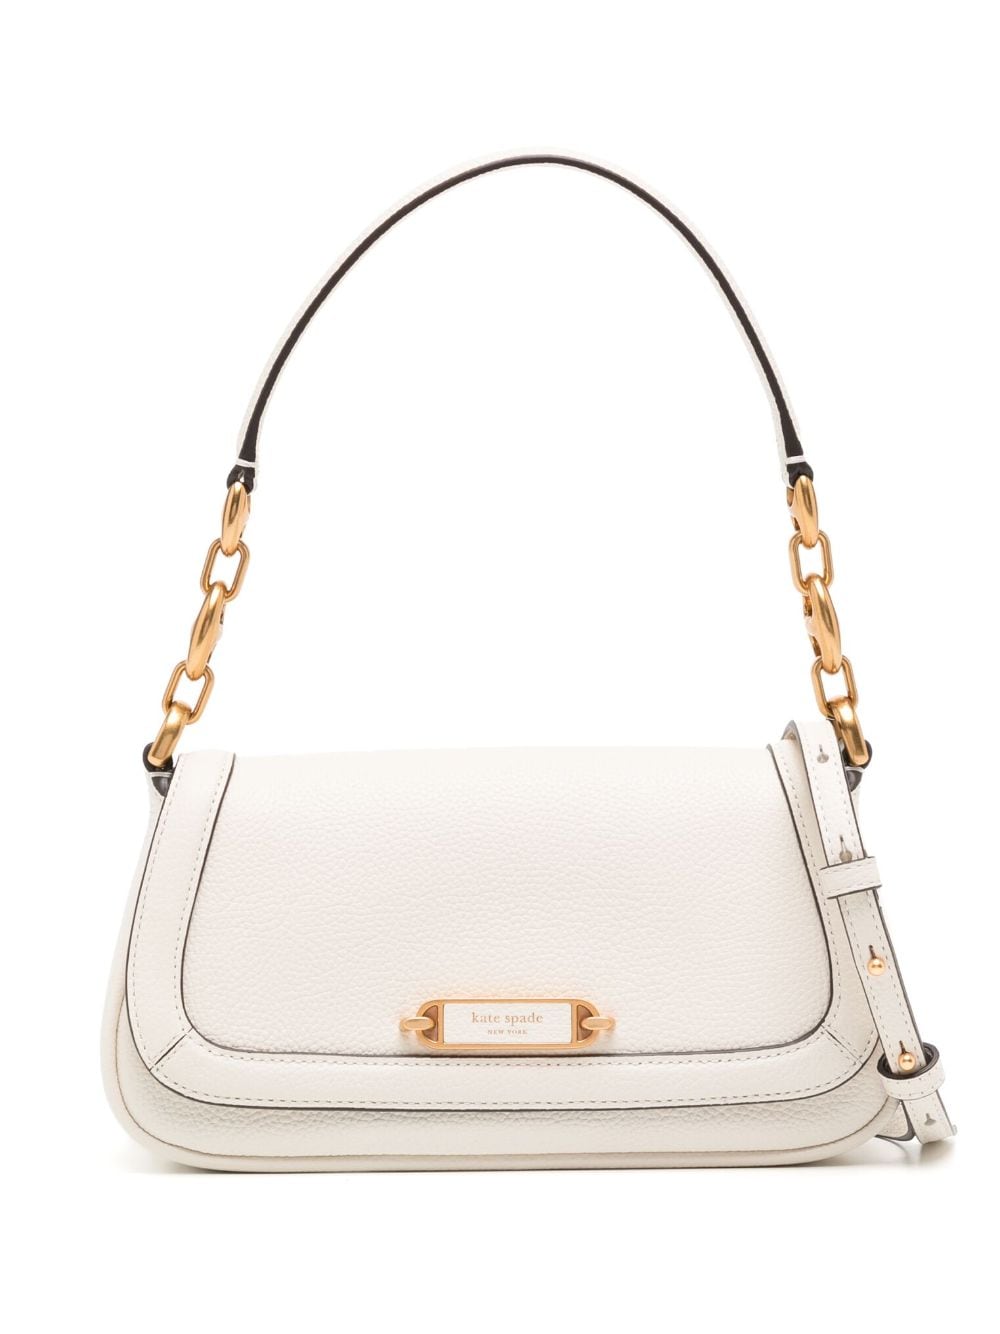 Kate Spade Small Gramercy leather bag - White